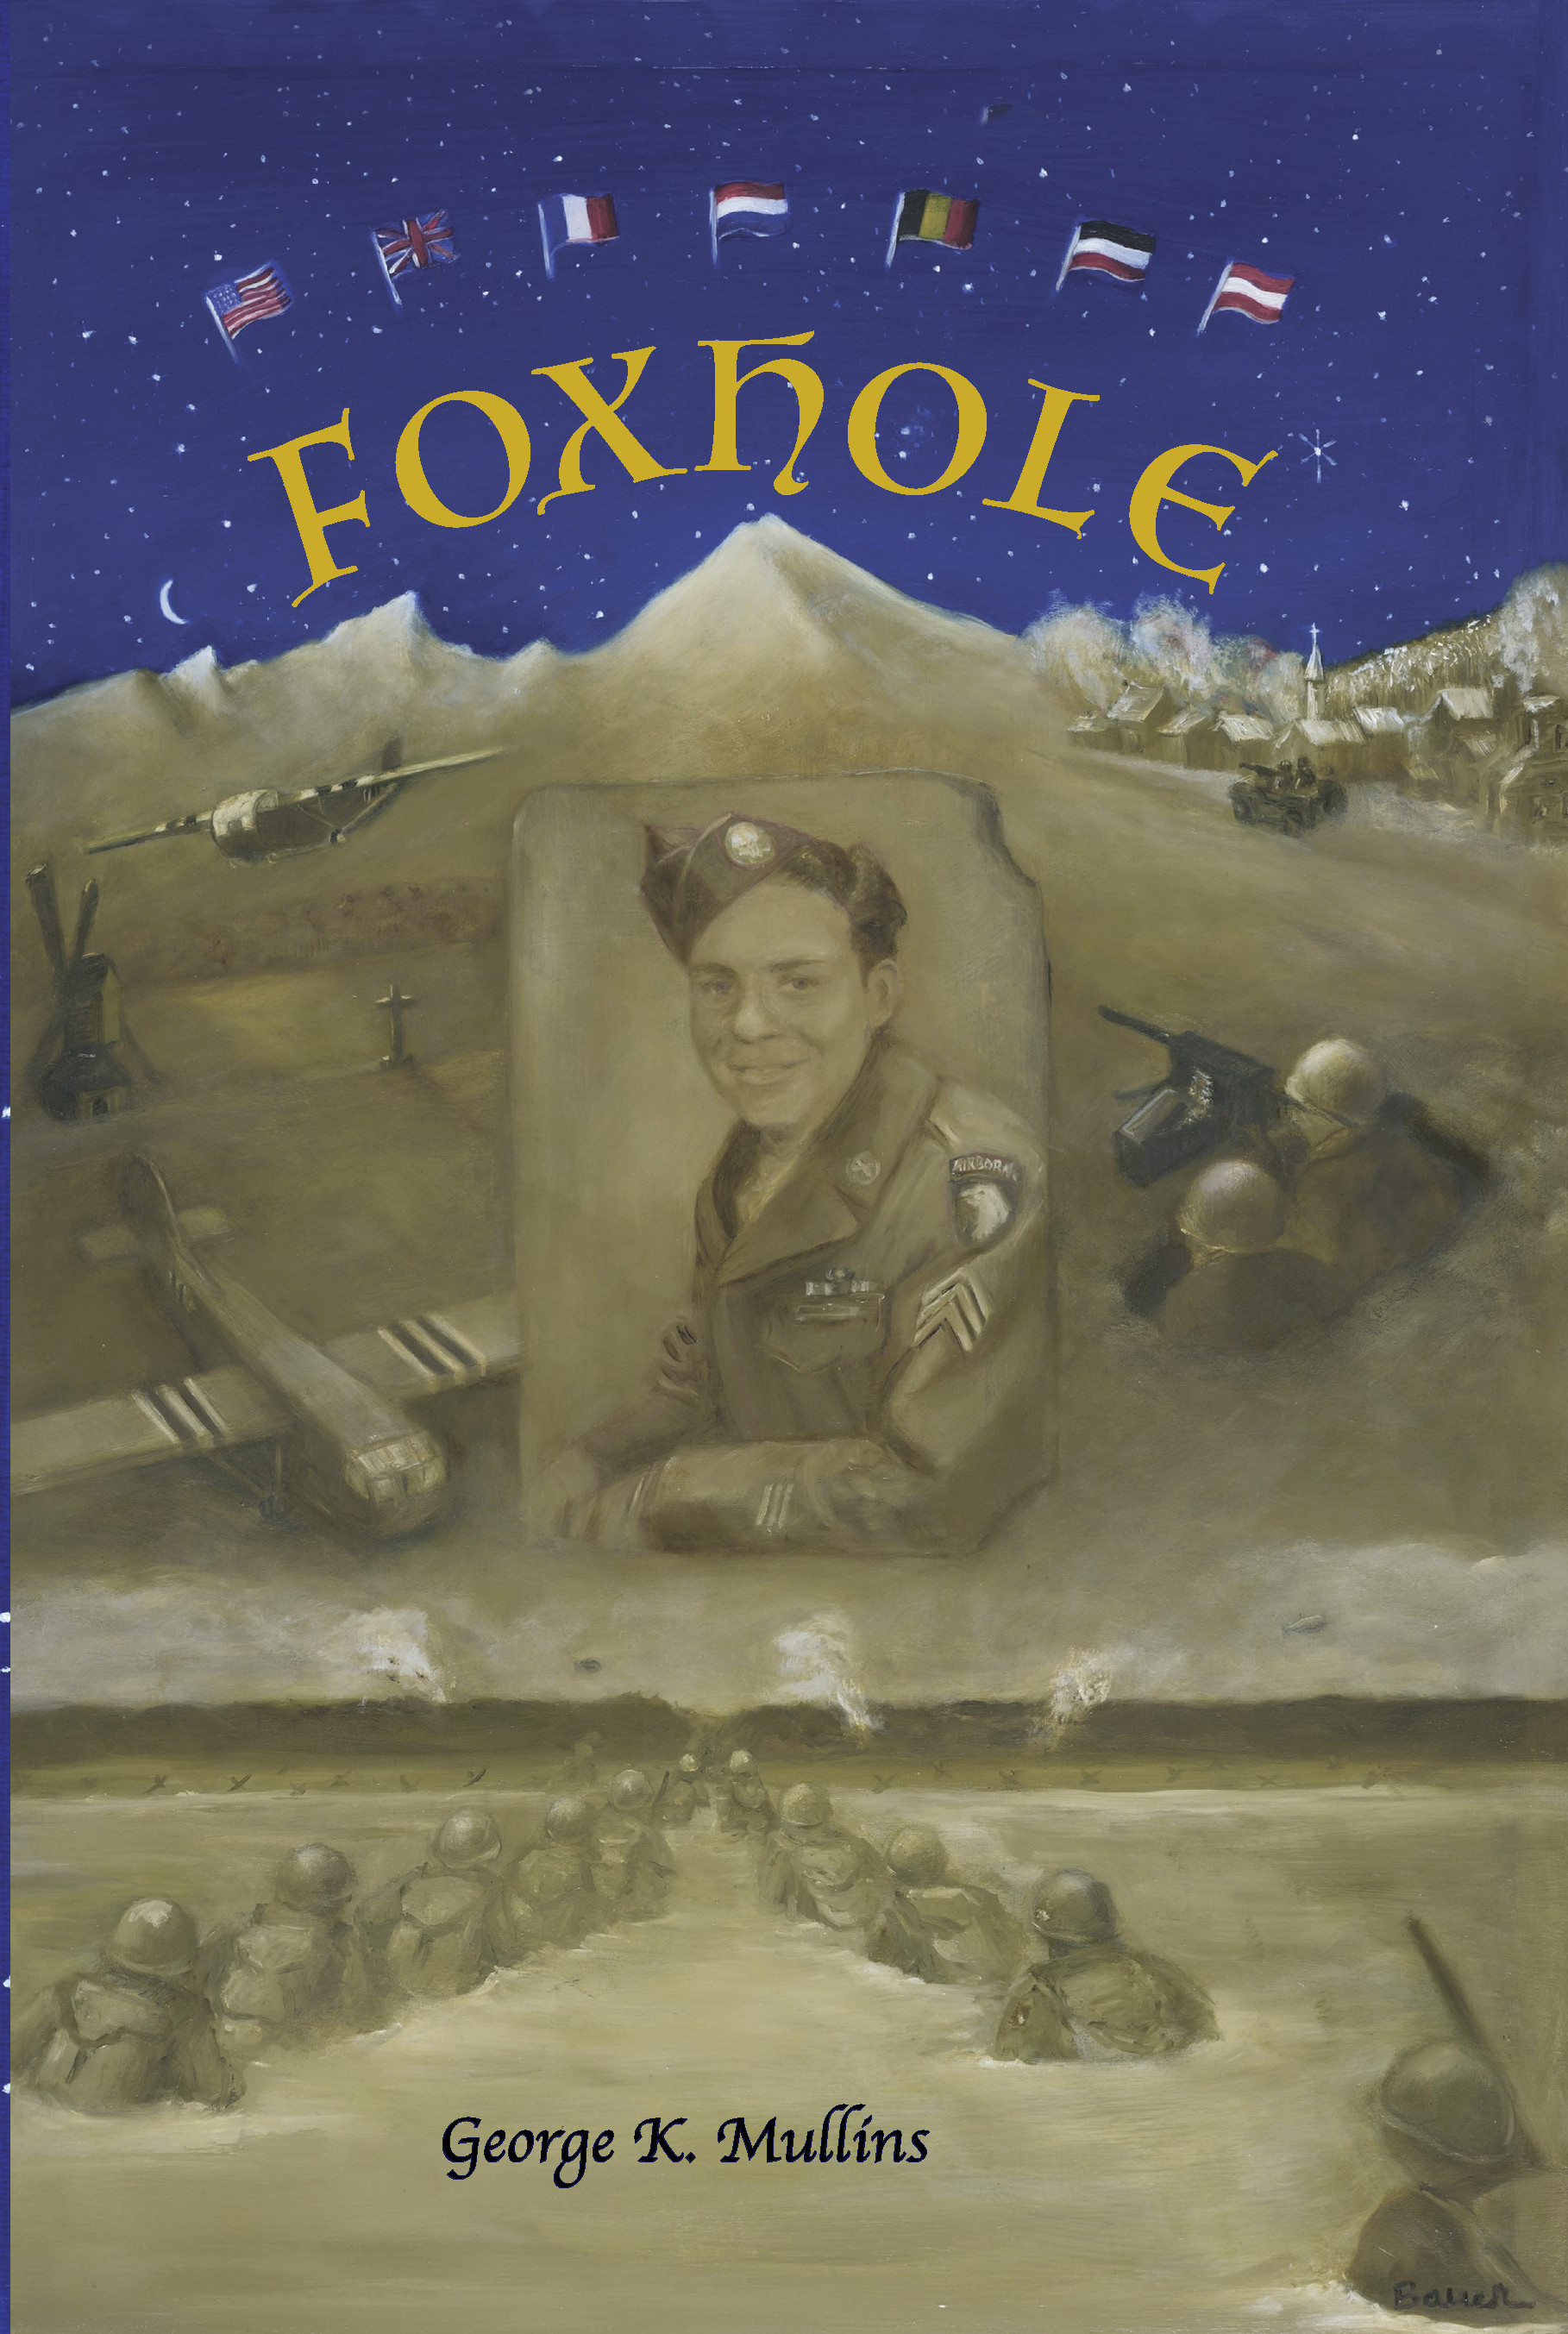 Foxhole by George K Mullins